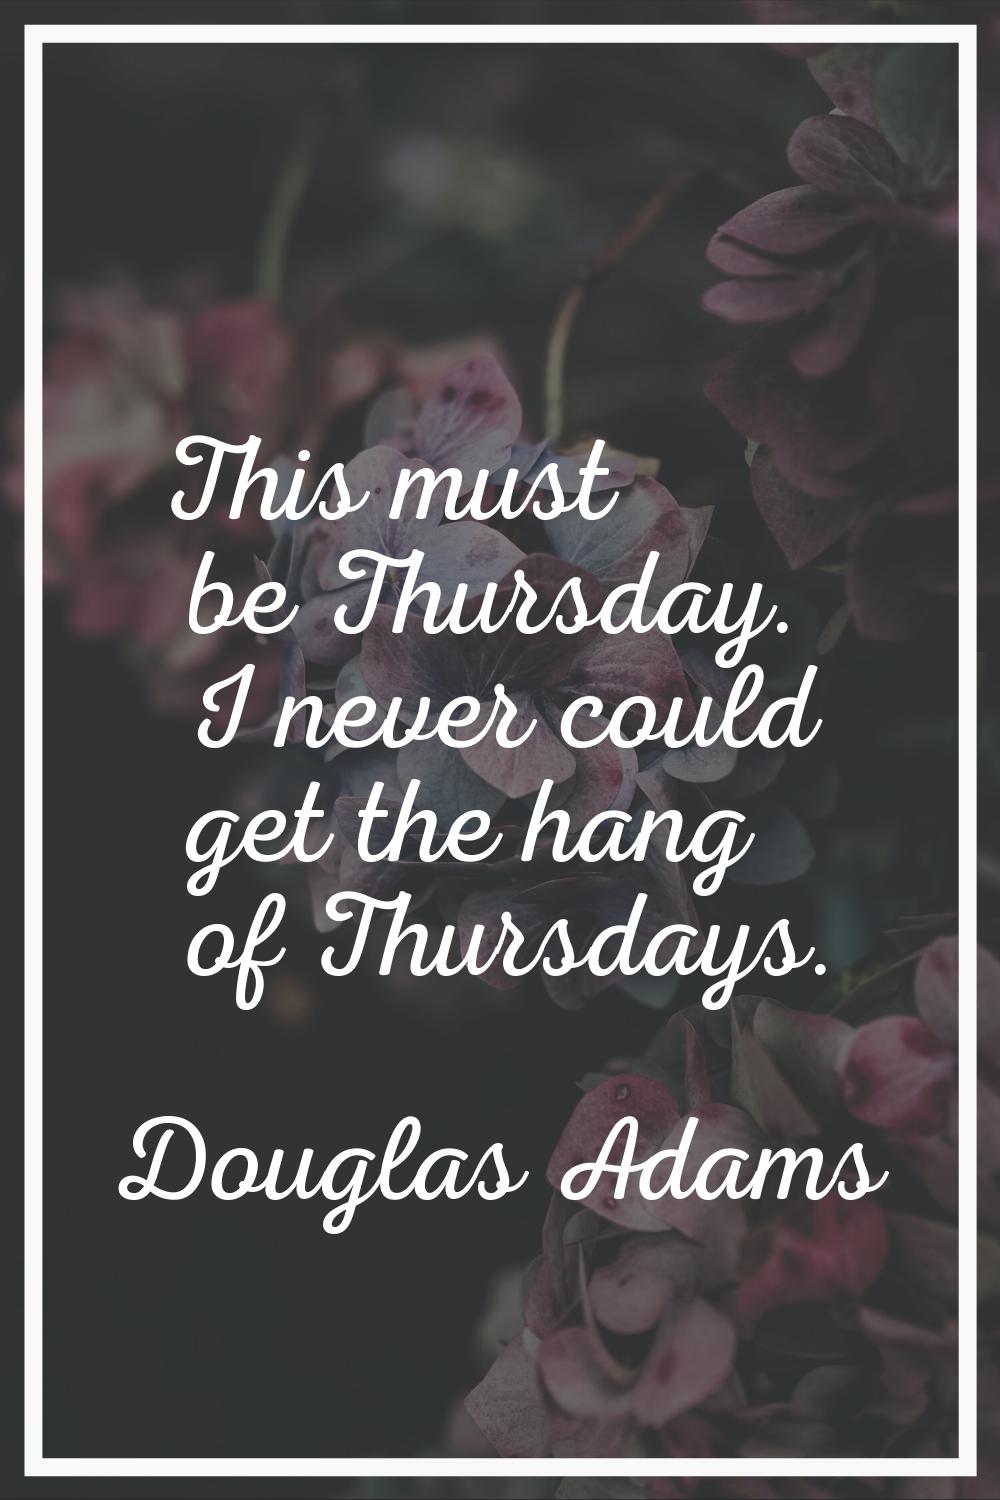 This must be Thursday. I never could get the hang of Thursdays.